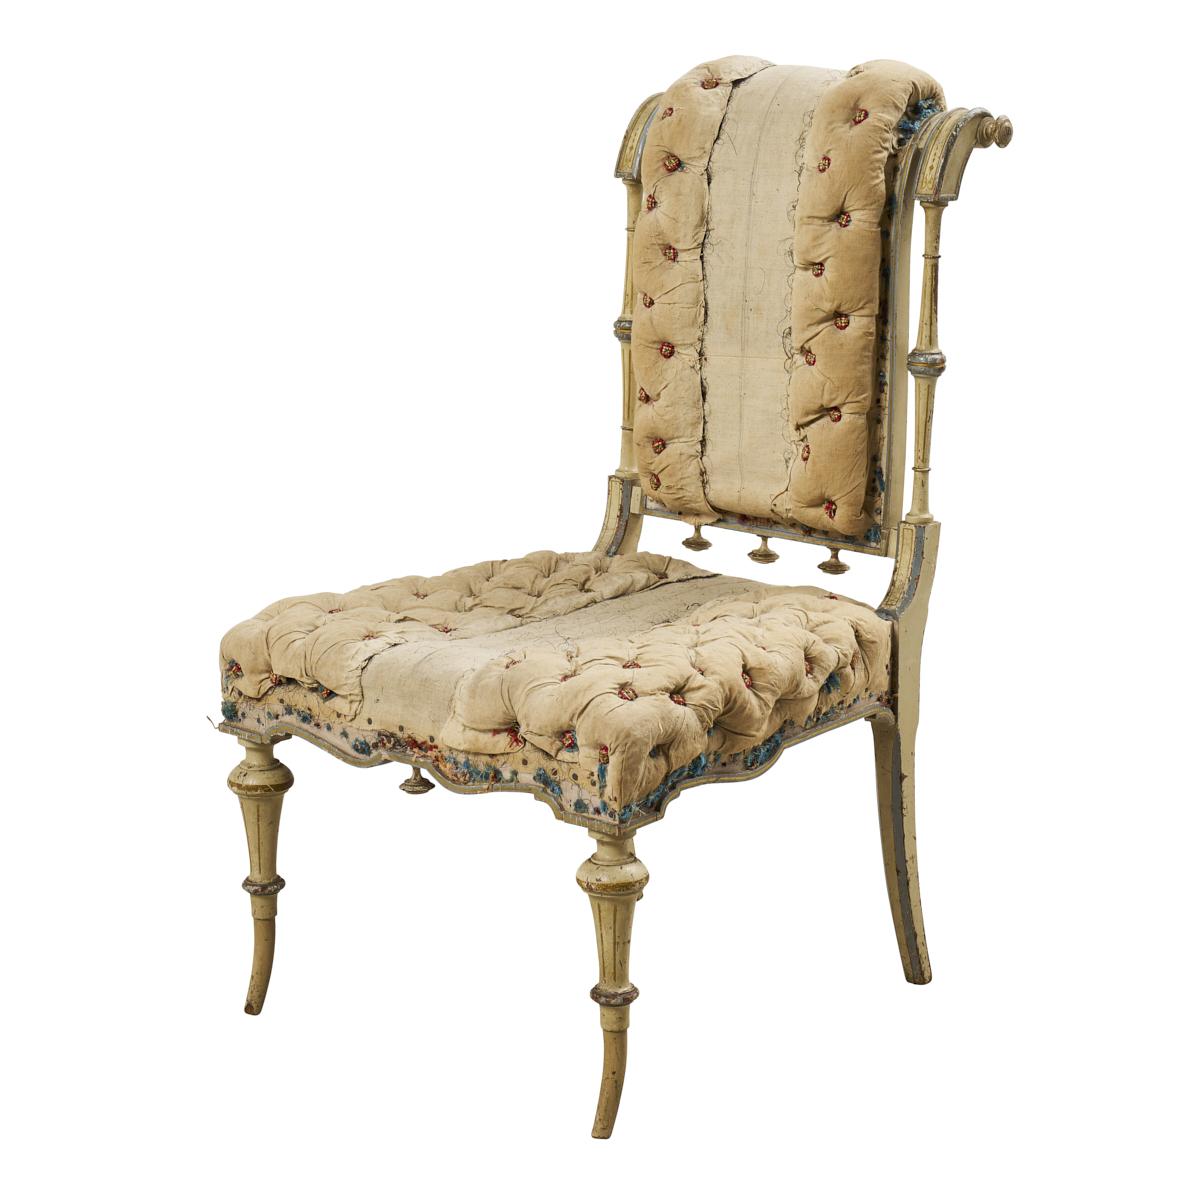 A rare treasure discovered in France, this courtly 18th-century slipper chair, with its fanciful carved frame and button-tufted upholstery, is not only a gorgeous antique but also a fabulous conversation piece.